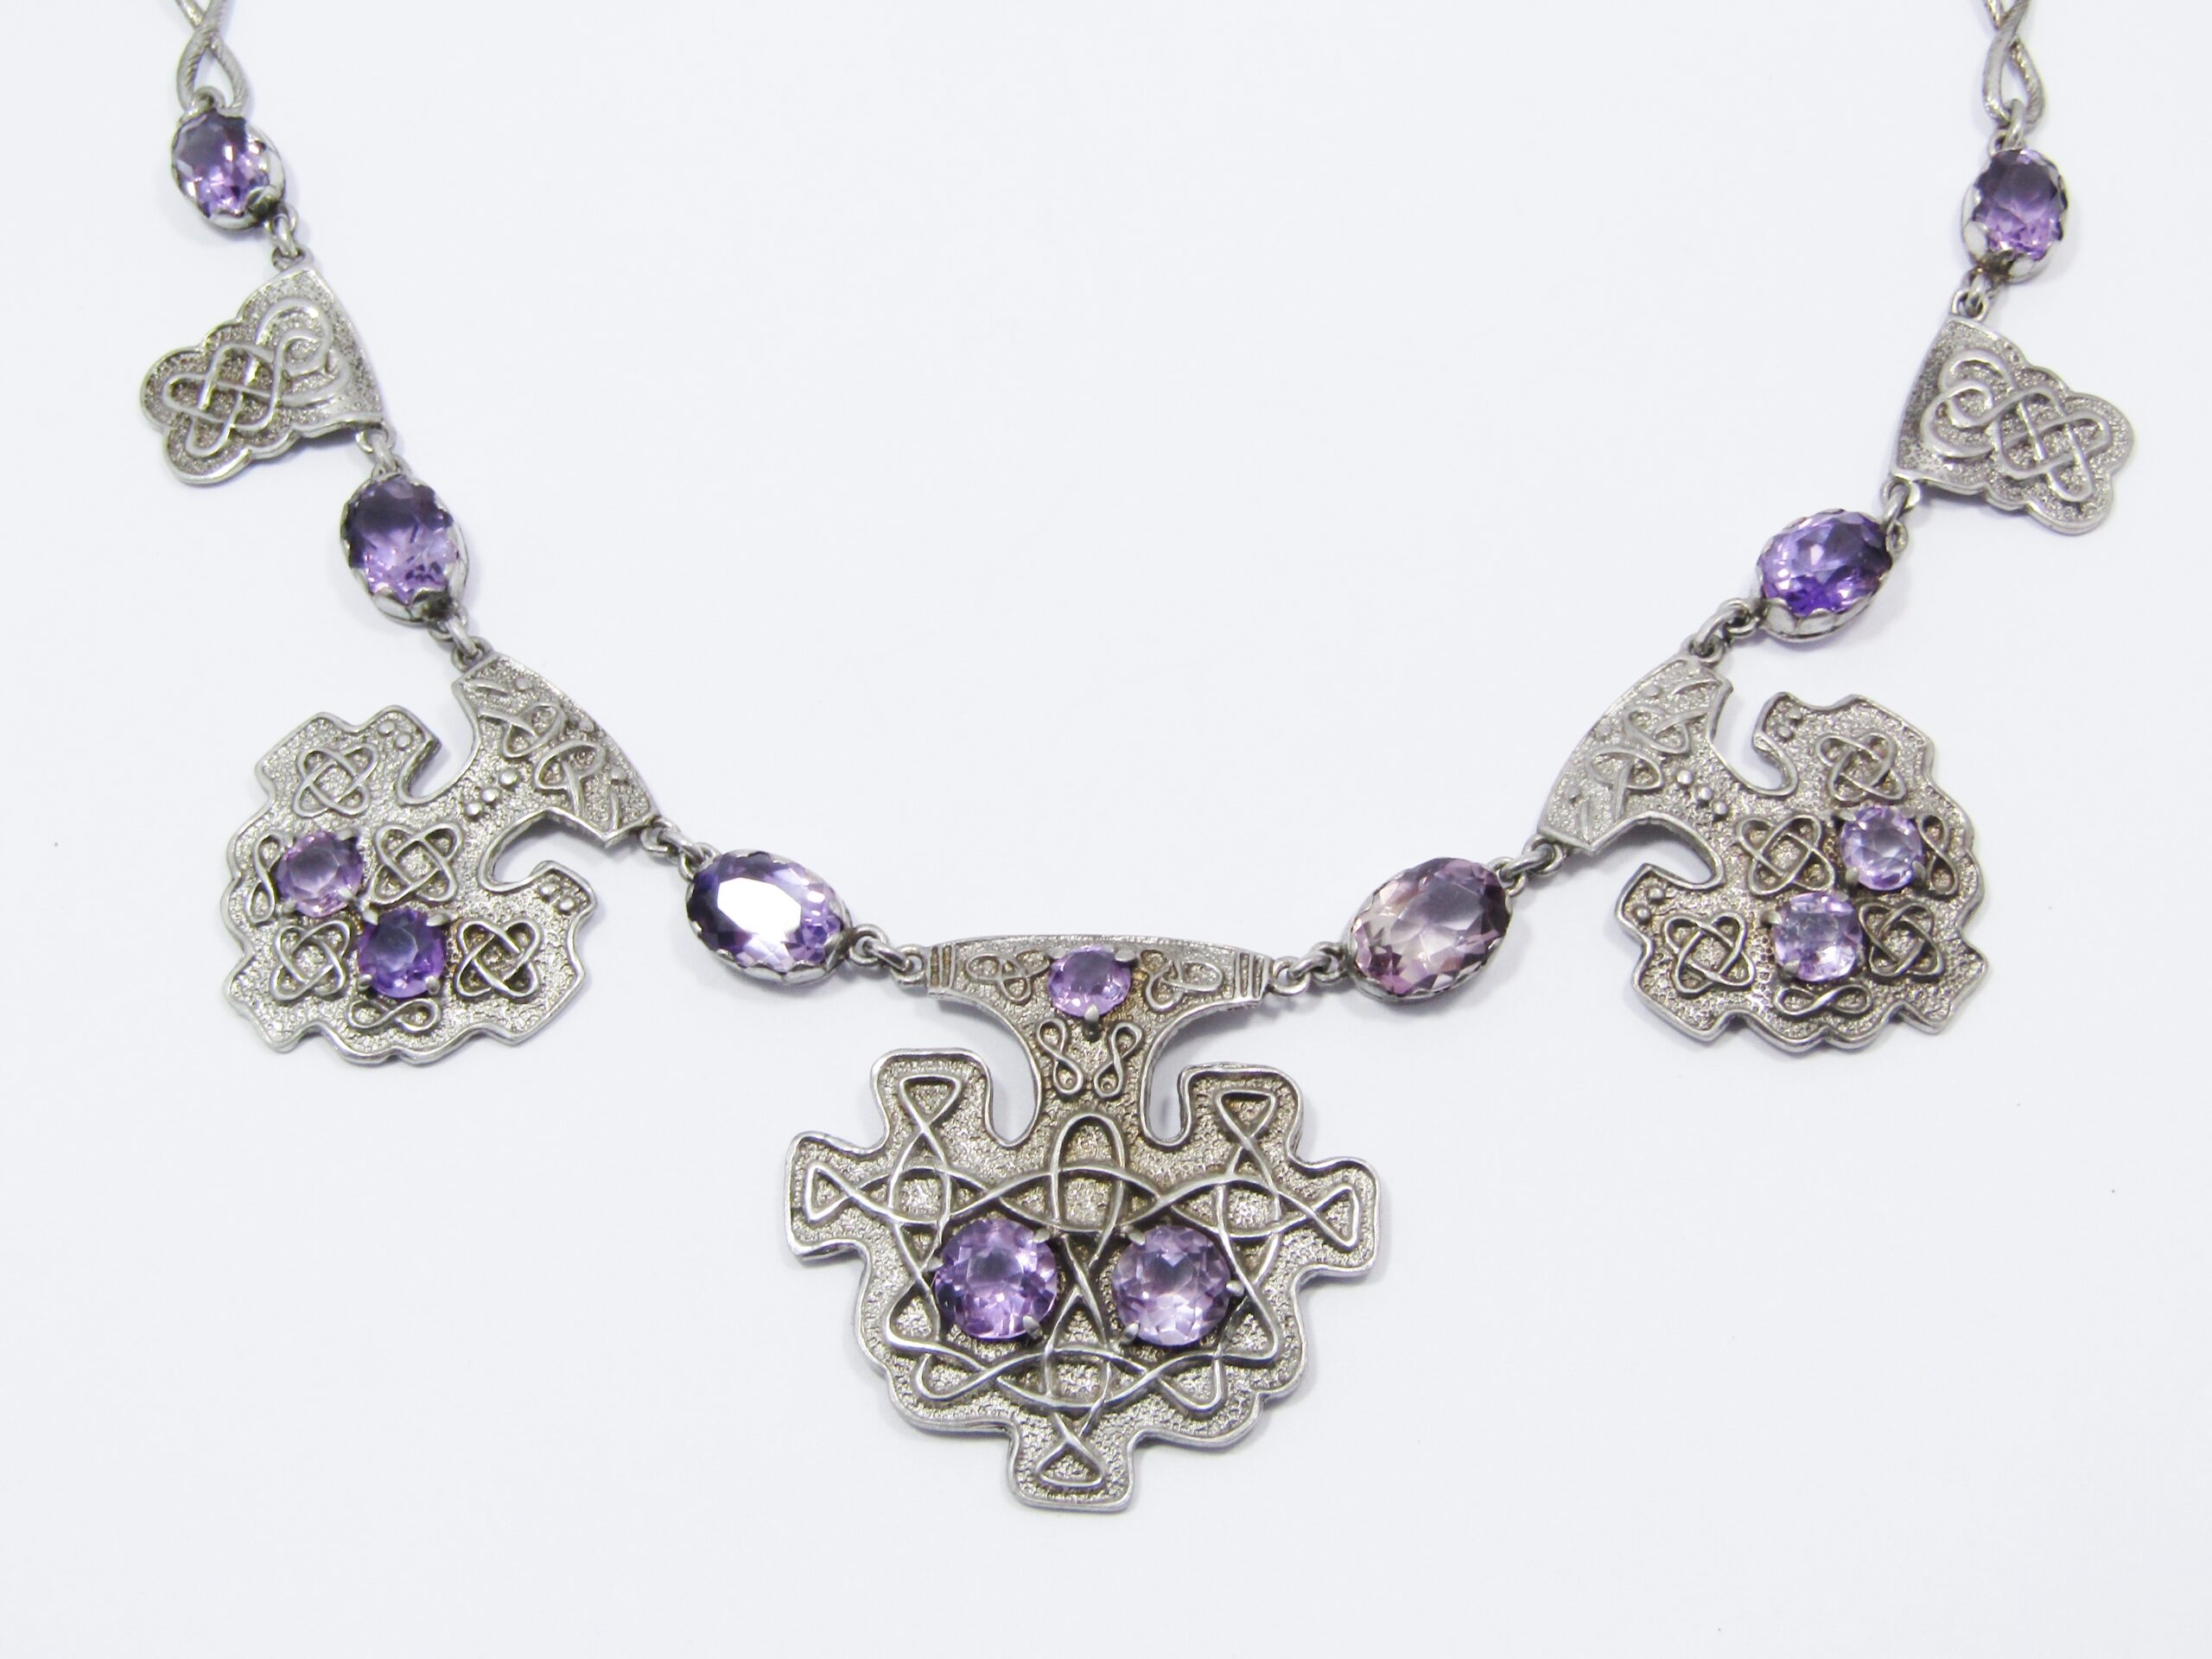 A Gorgeous Scandinavian Necklace With a Nordic Design Set with Amethyst in 830 Silver